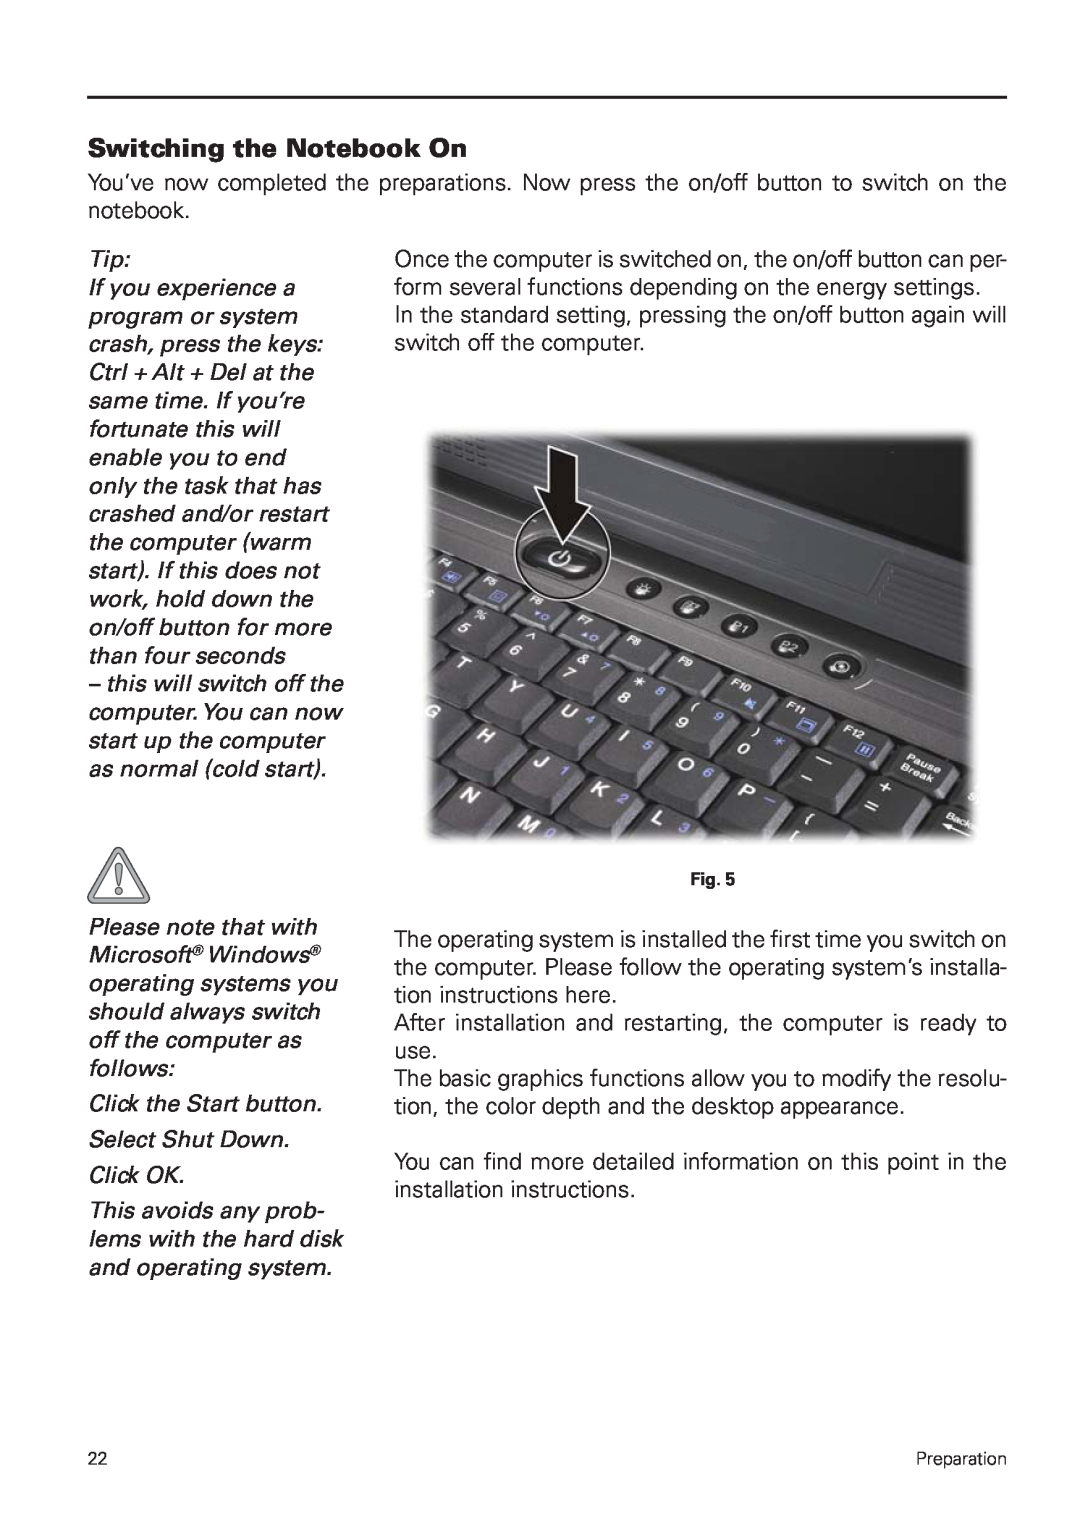 MAXDATA 5500 IR user manual Switching the Notebook On, Click the Start button. Select Shut Down. Click OK 